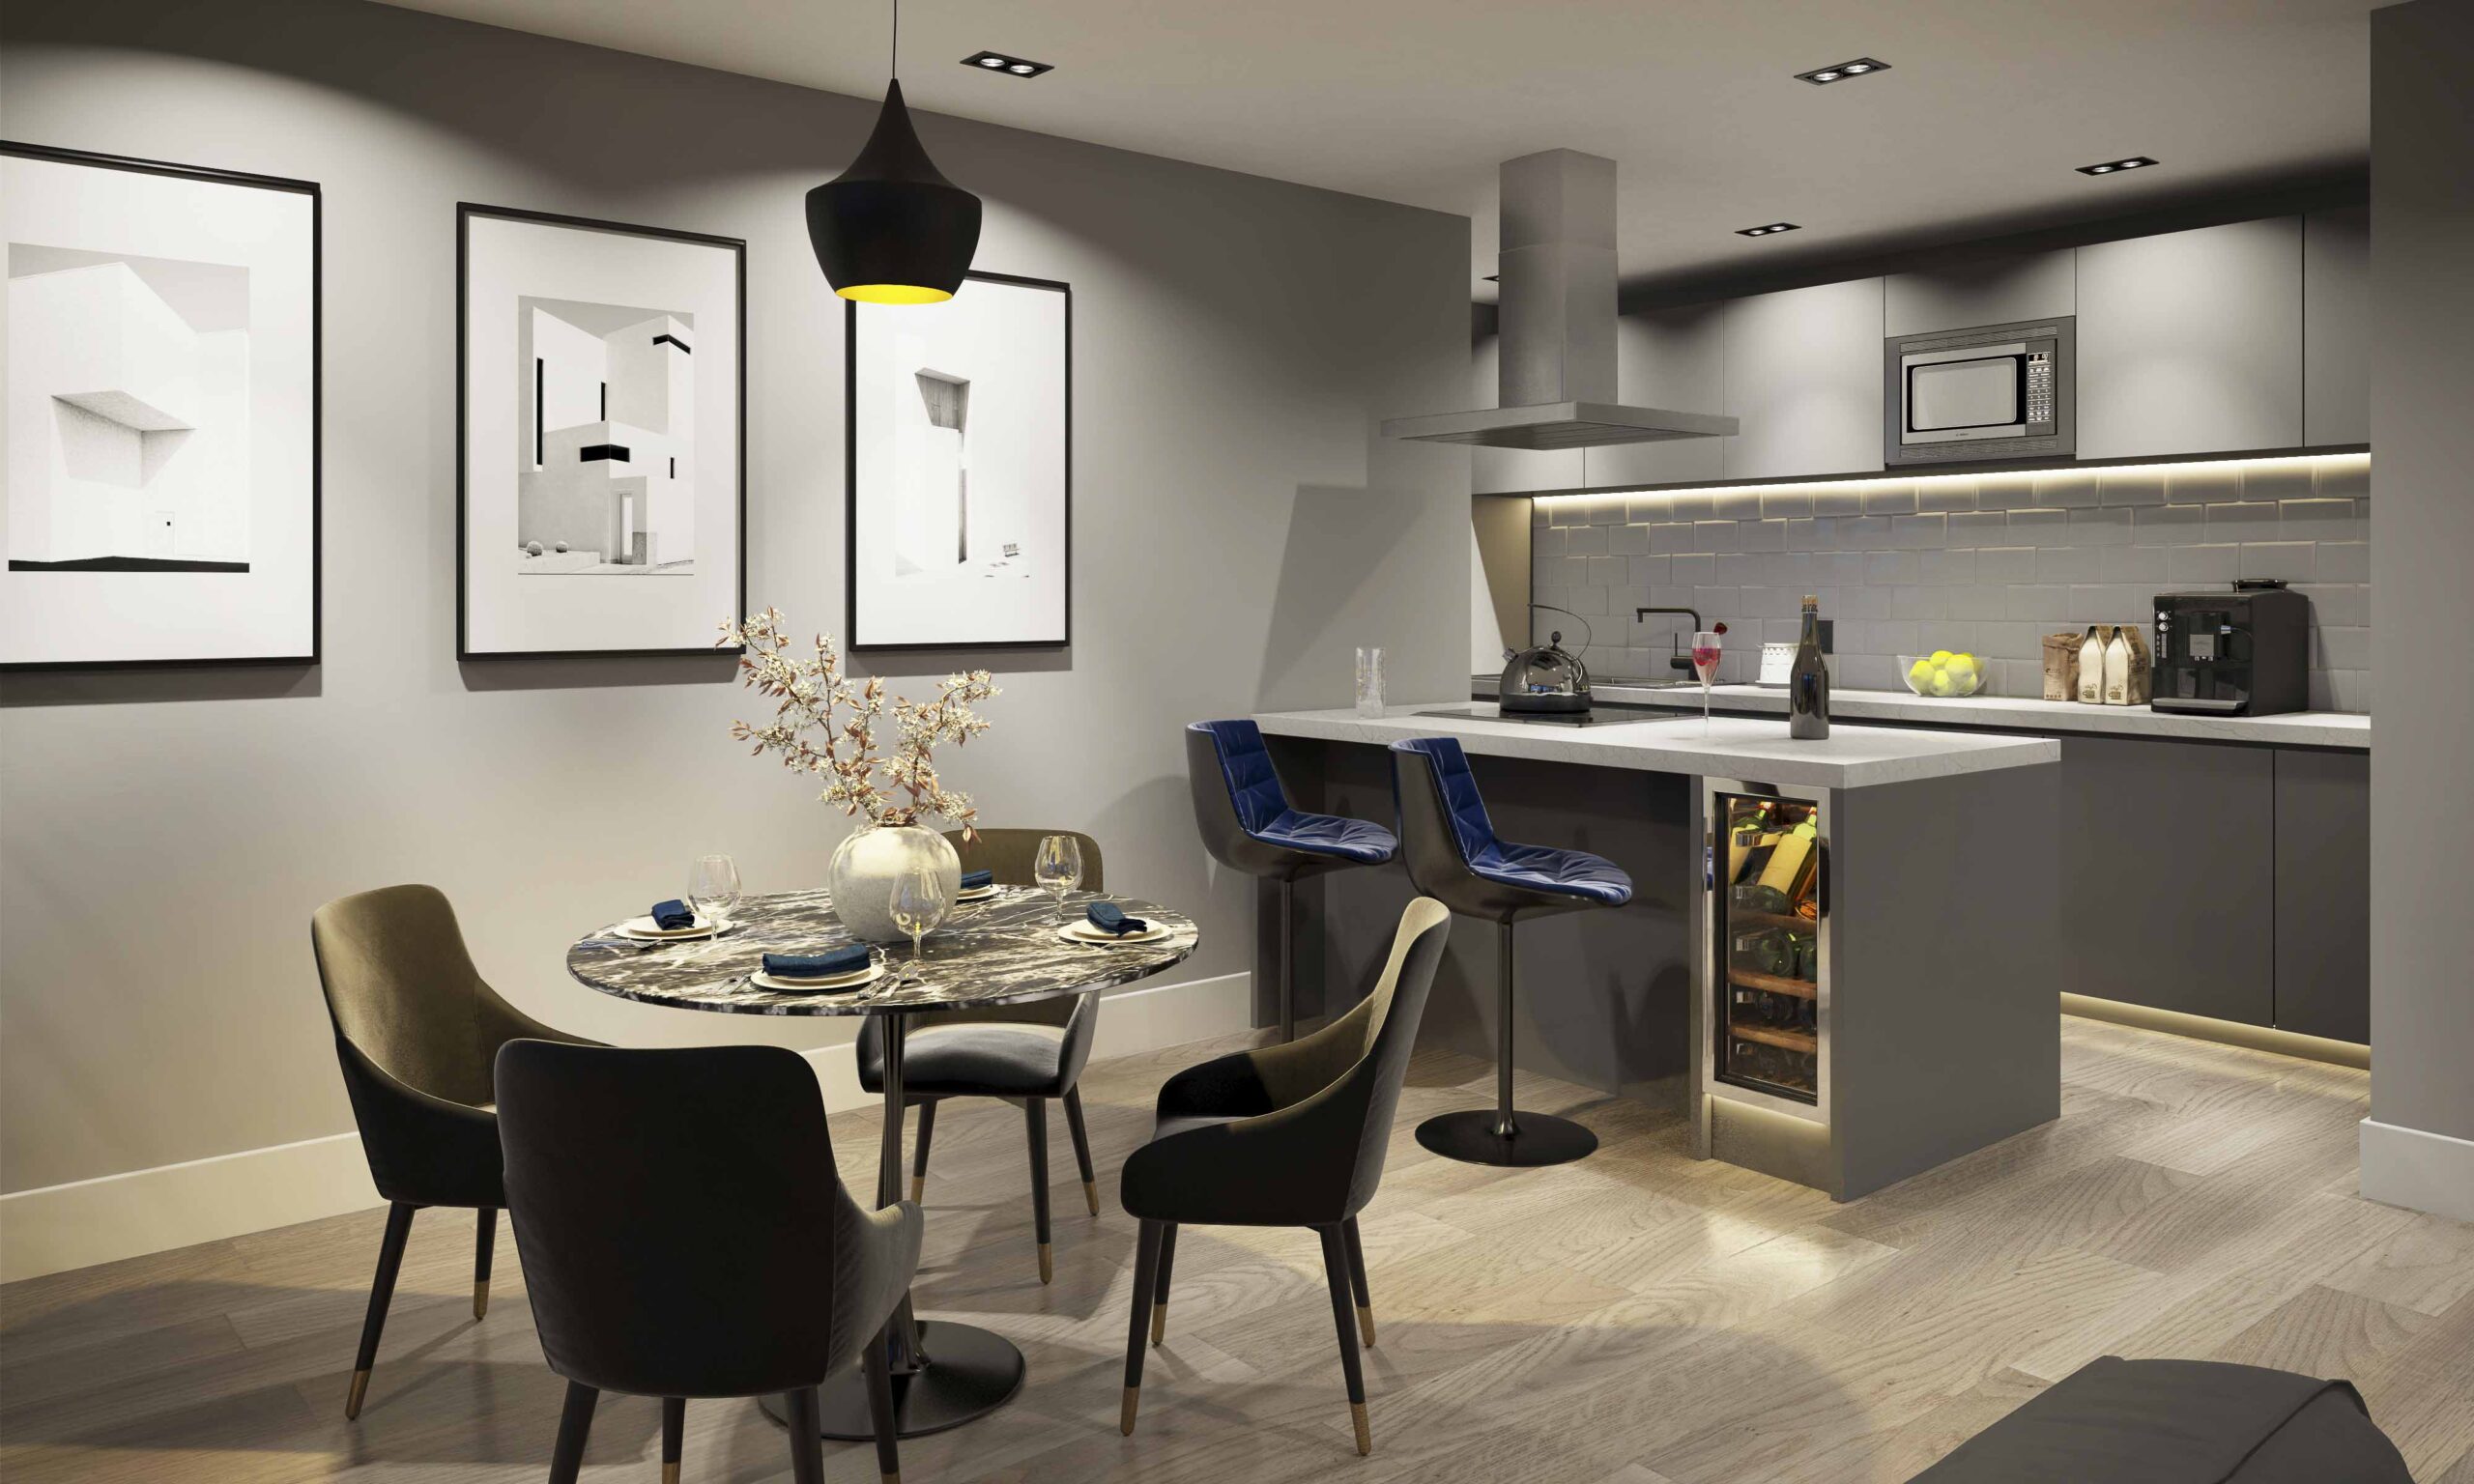 29 - Penthouse 2-Bed Kitchen Night